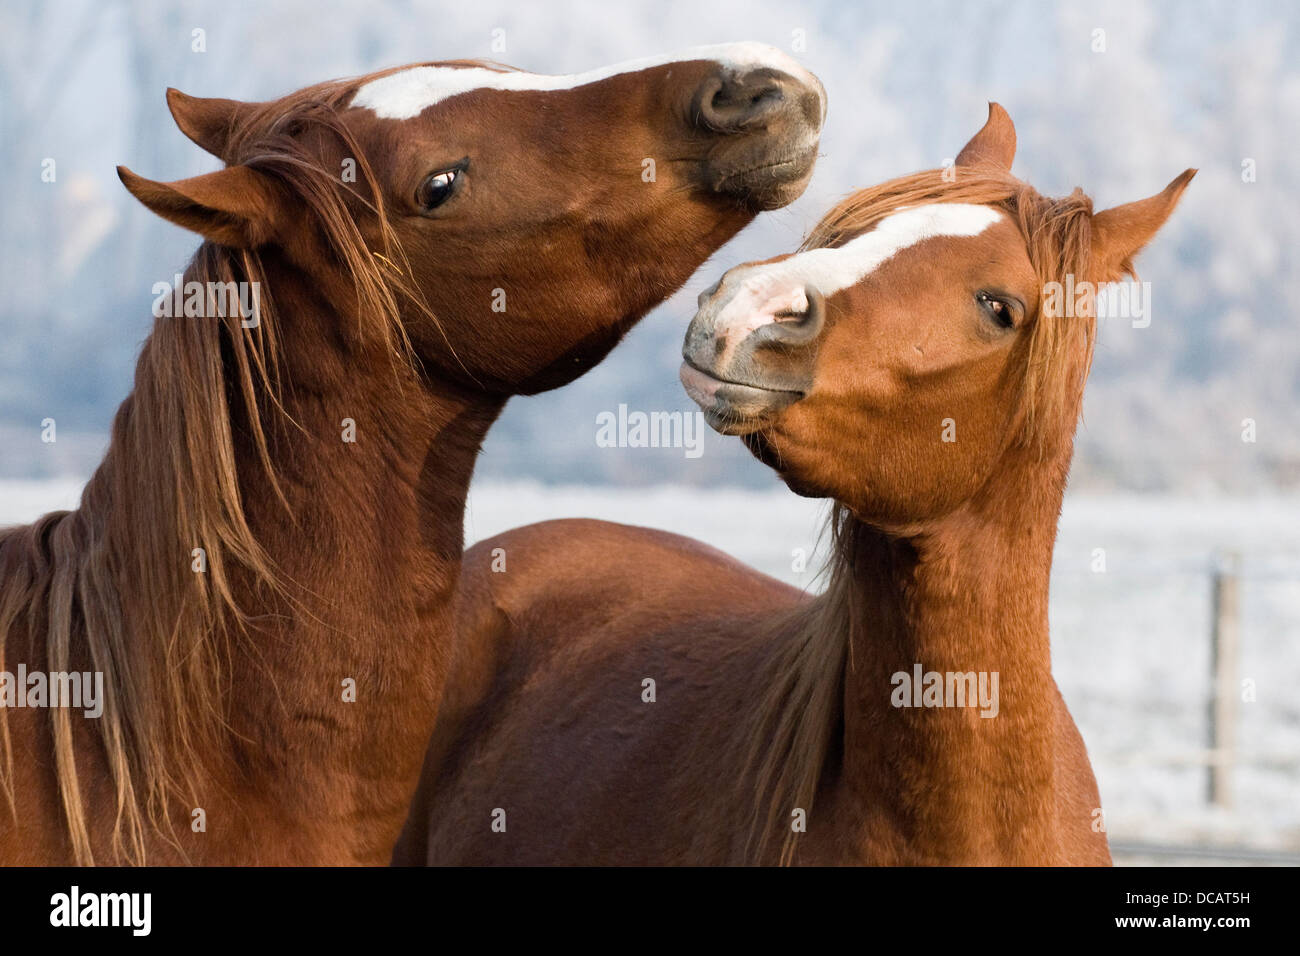 colt, horse, farm, mammal, animal, nature, mare, foal, stallion, brown, speed, pasture, beautiful, race, equestrian, fast, equine, gallop, run, young, Stock Photo